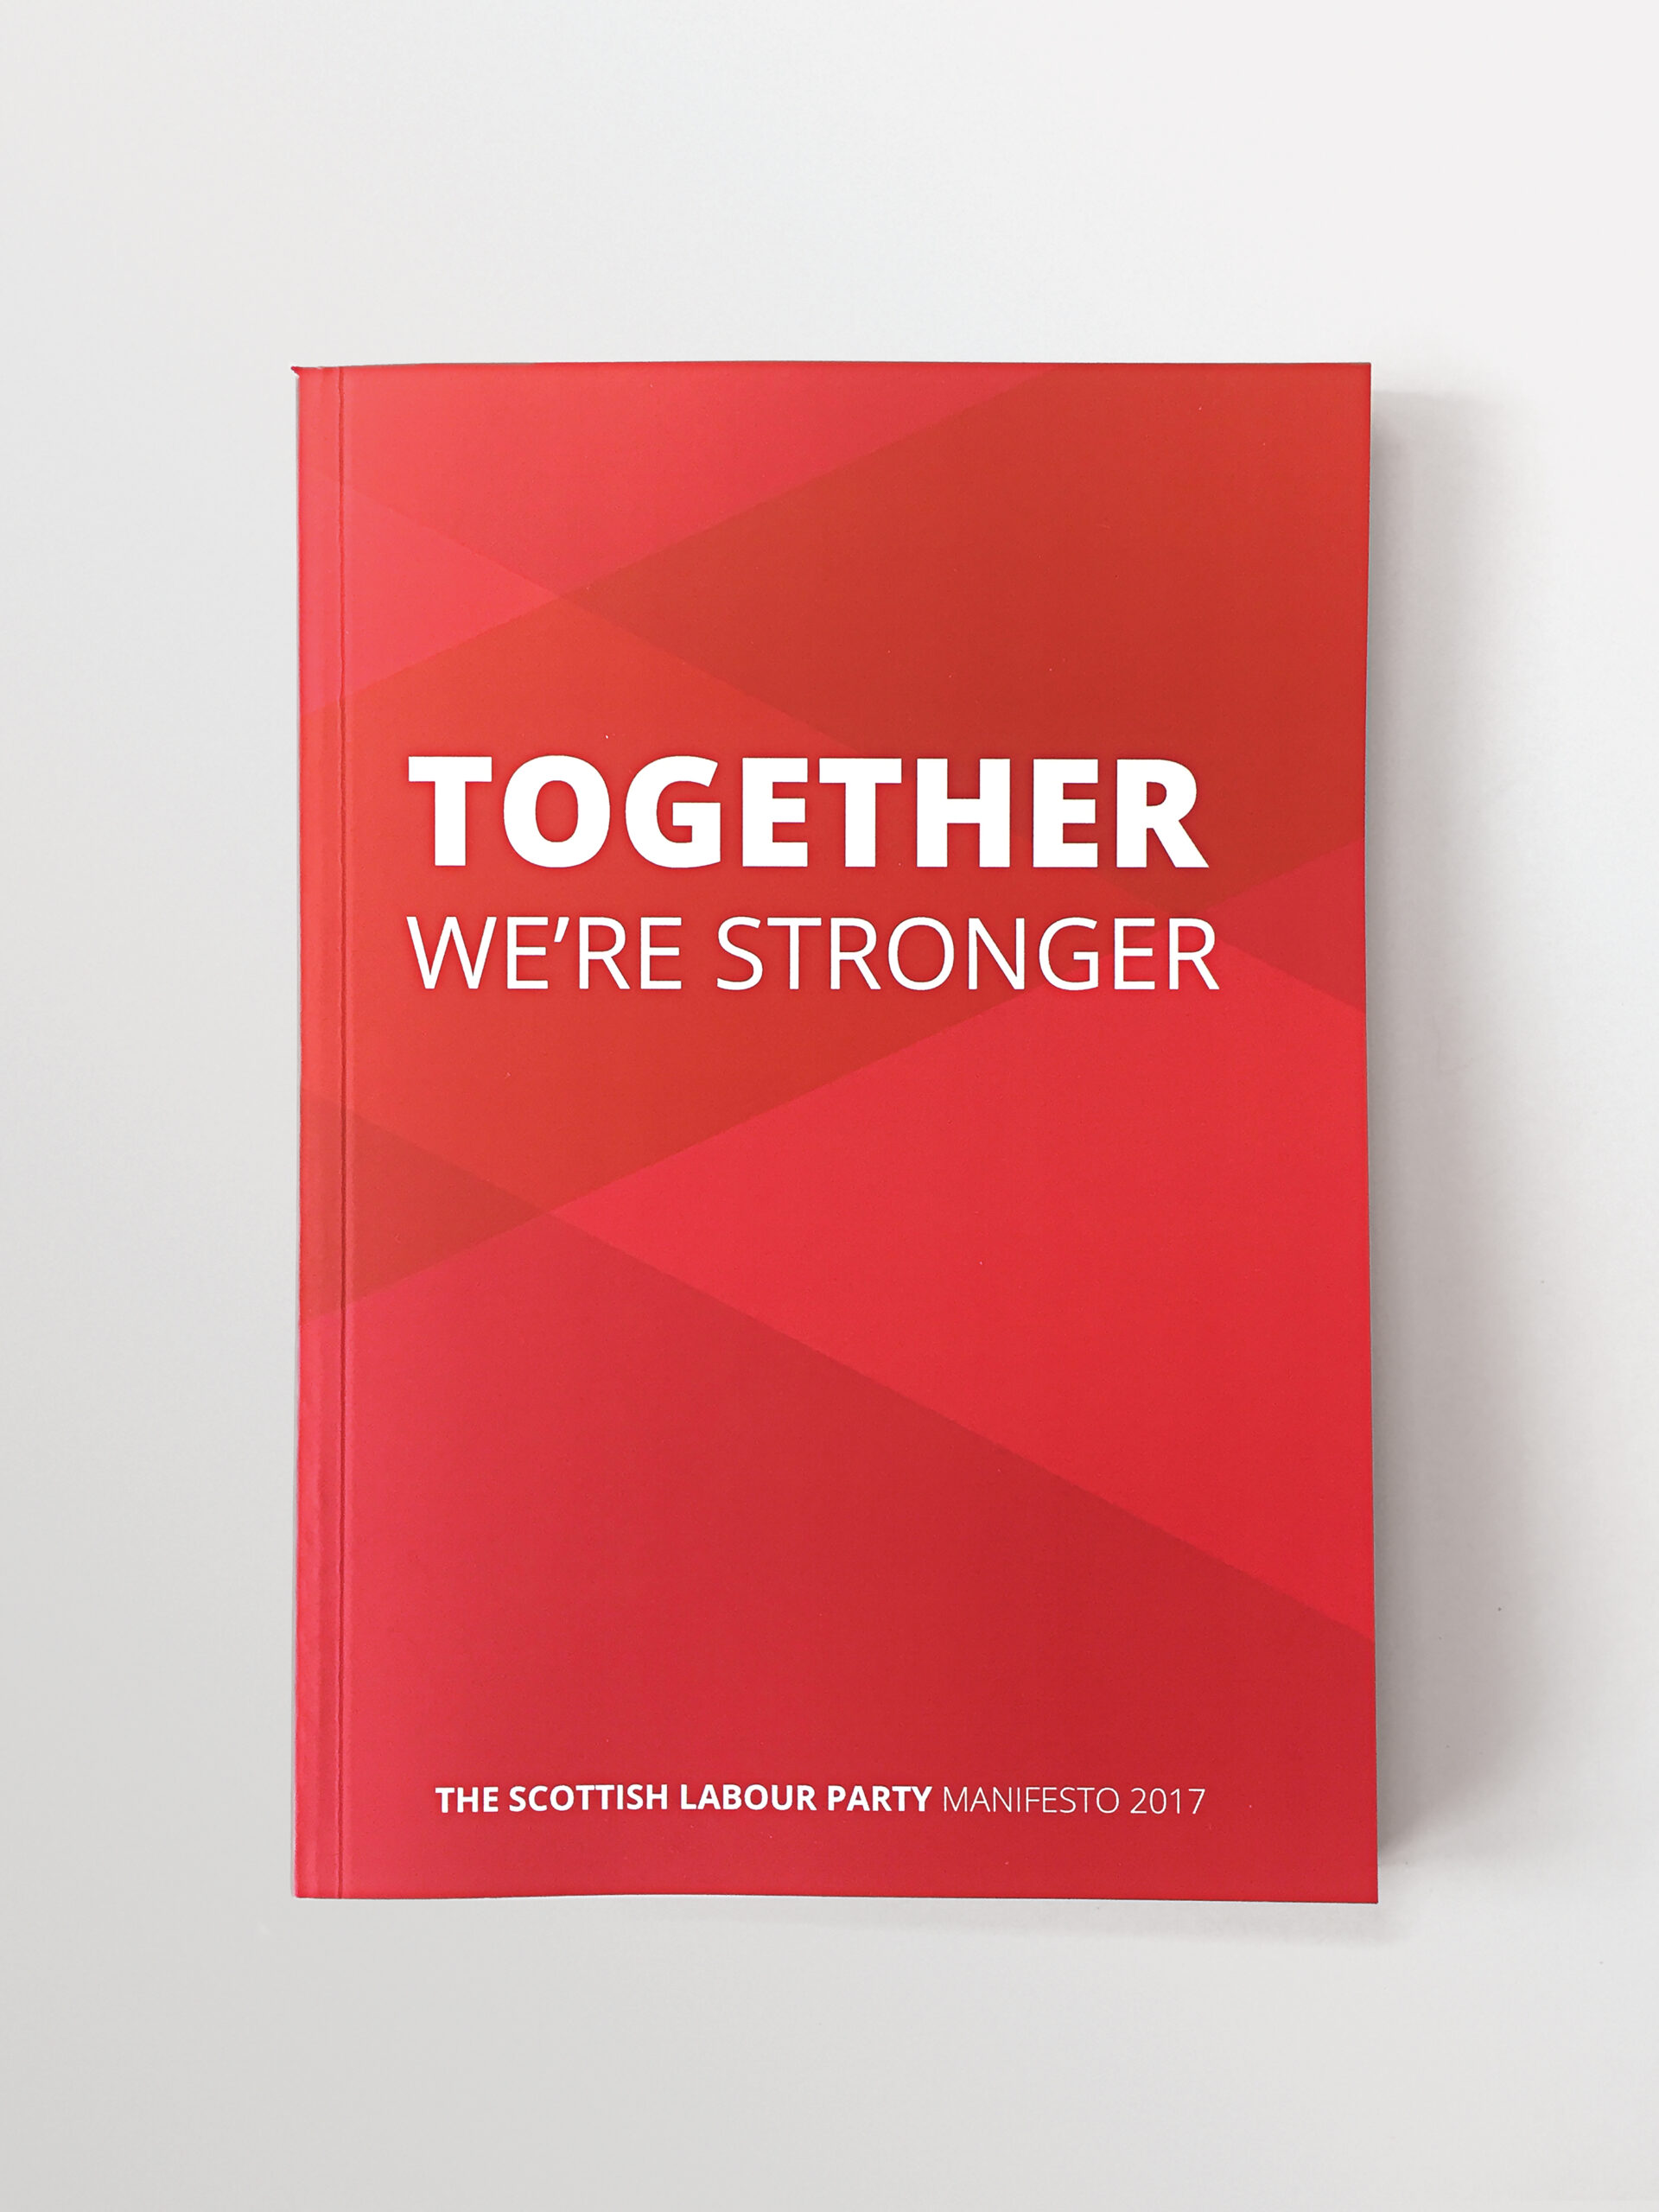 This week’s most talked about job – The Scottish Labour Party Manifesto